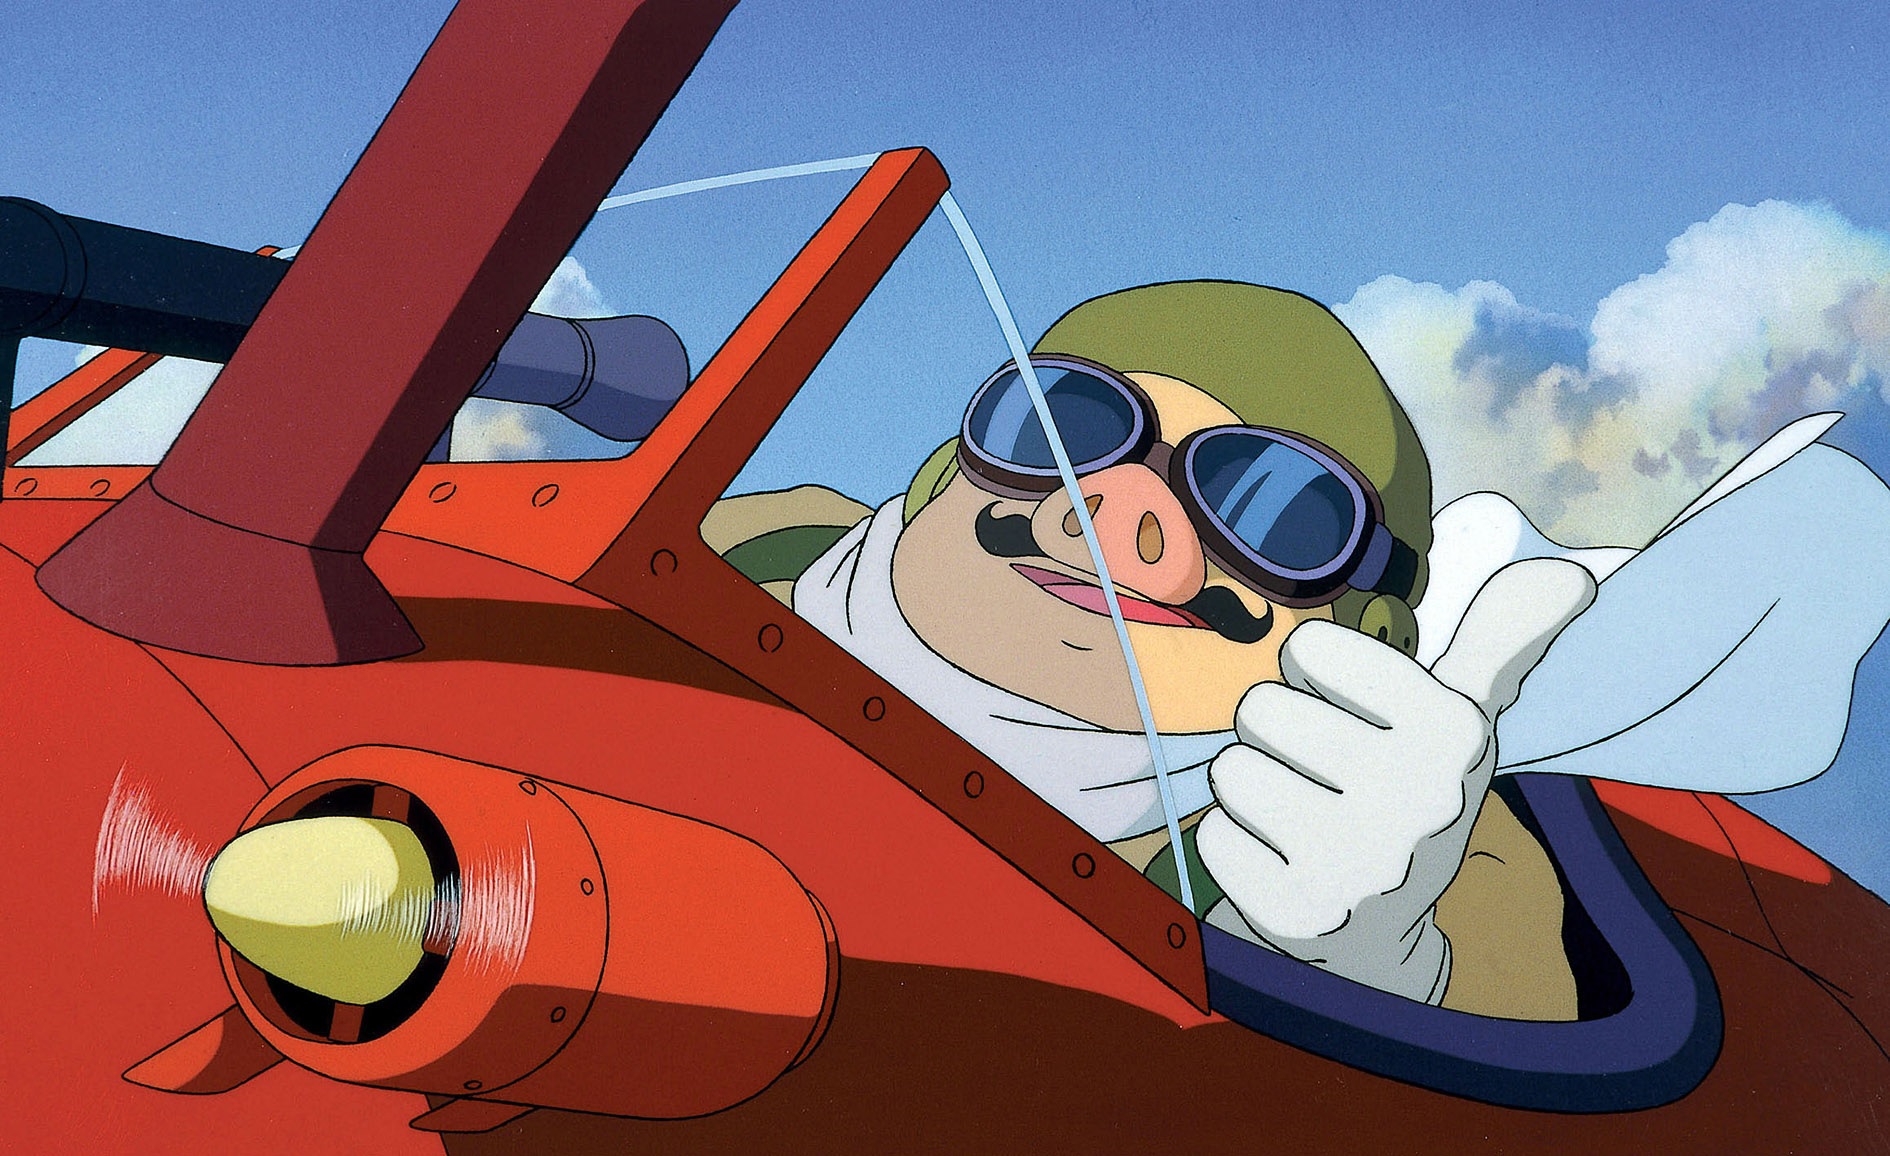 Porco Rosso flies through the skies in his red plane.